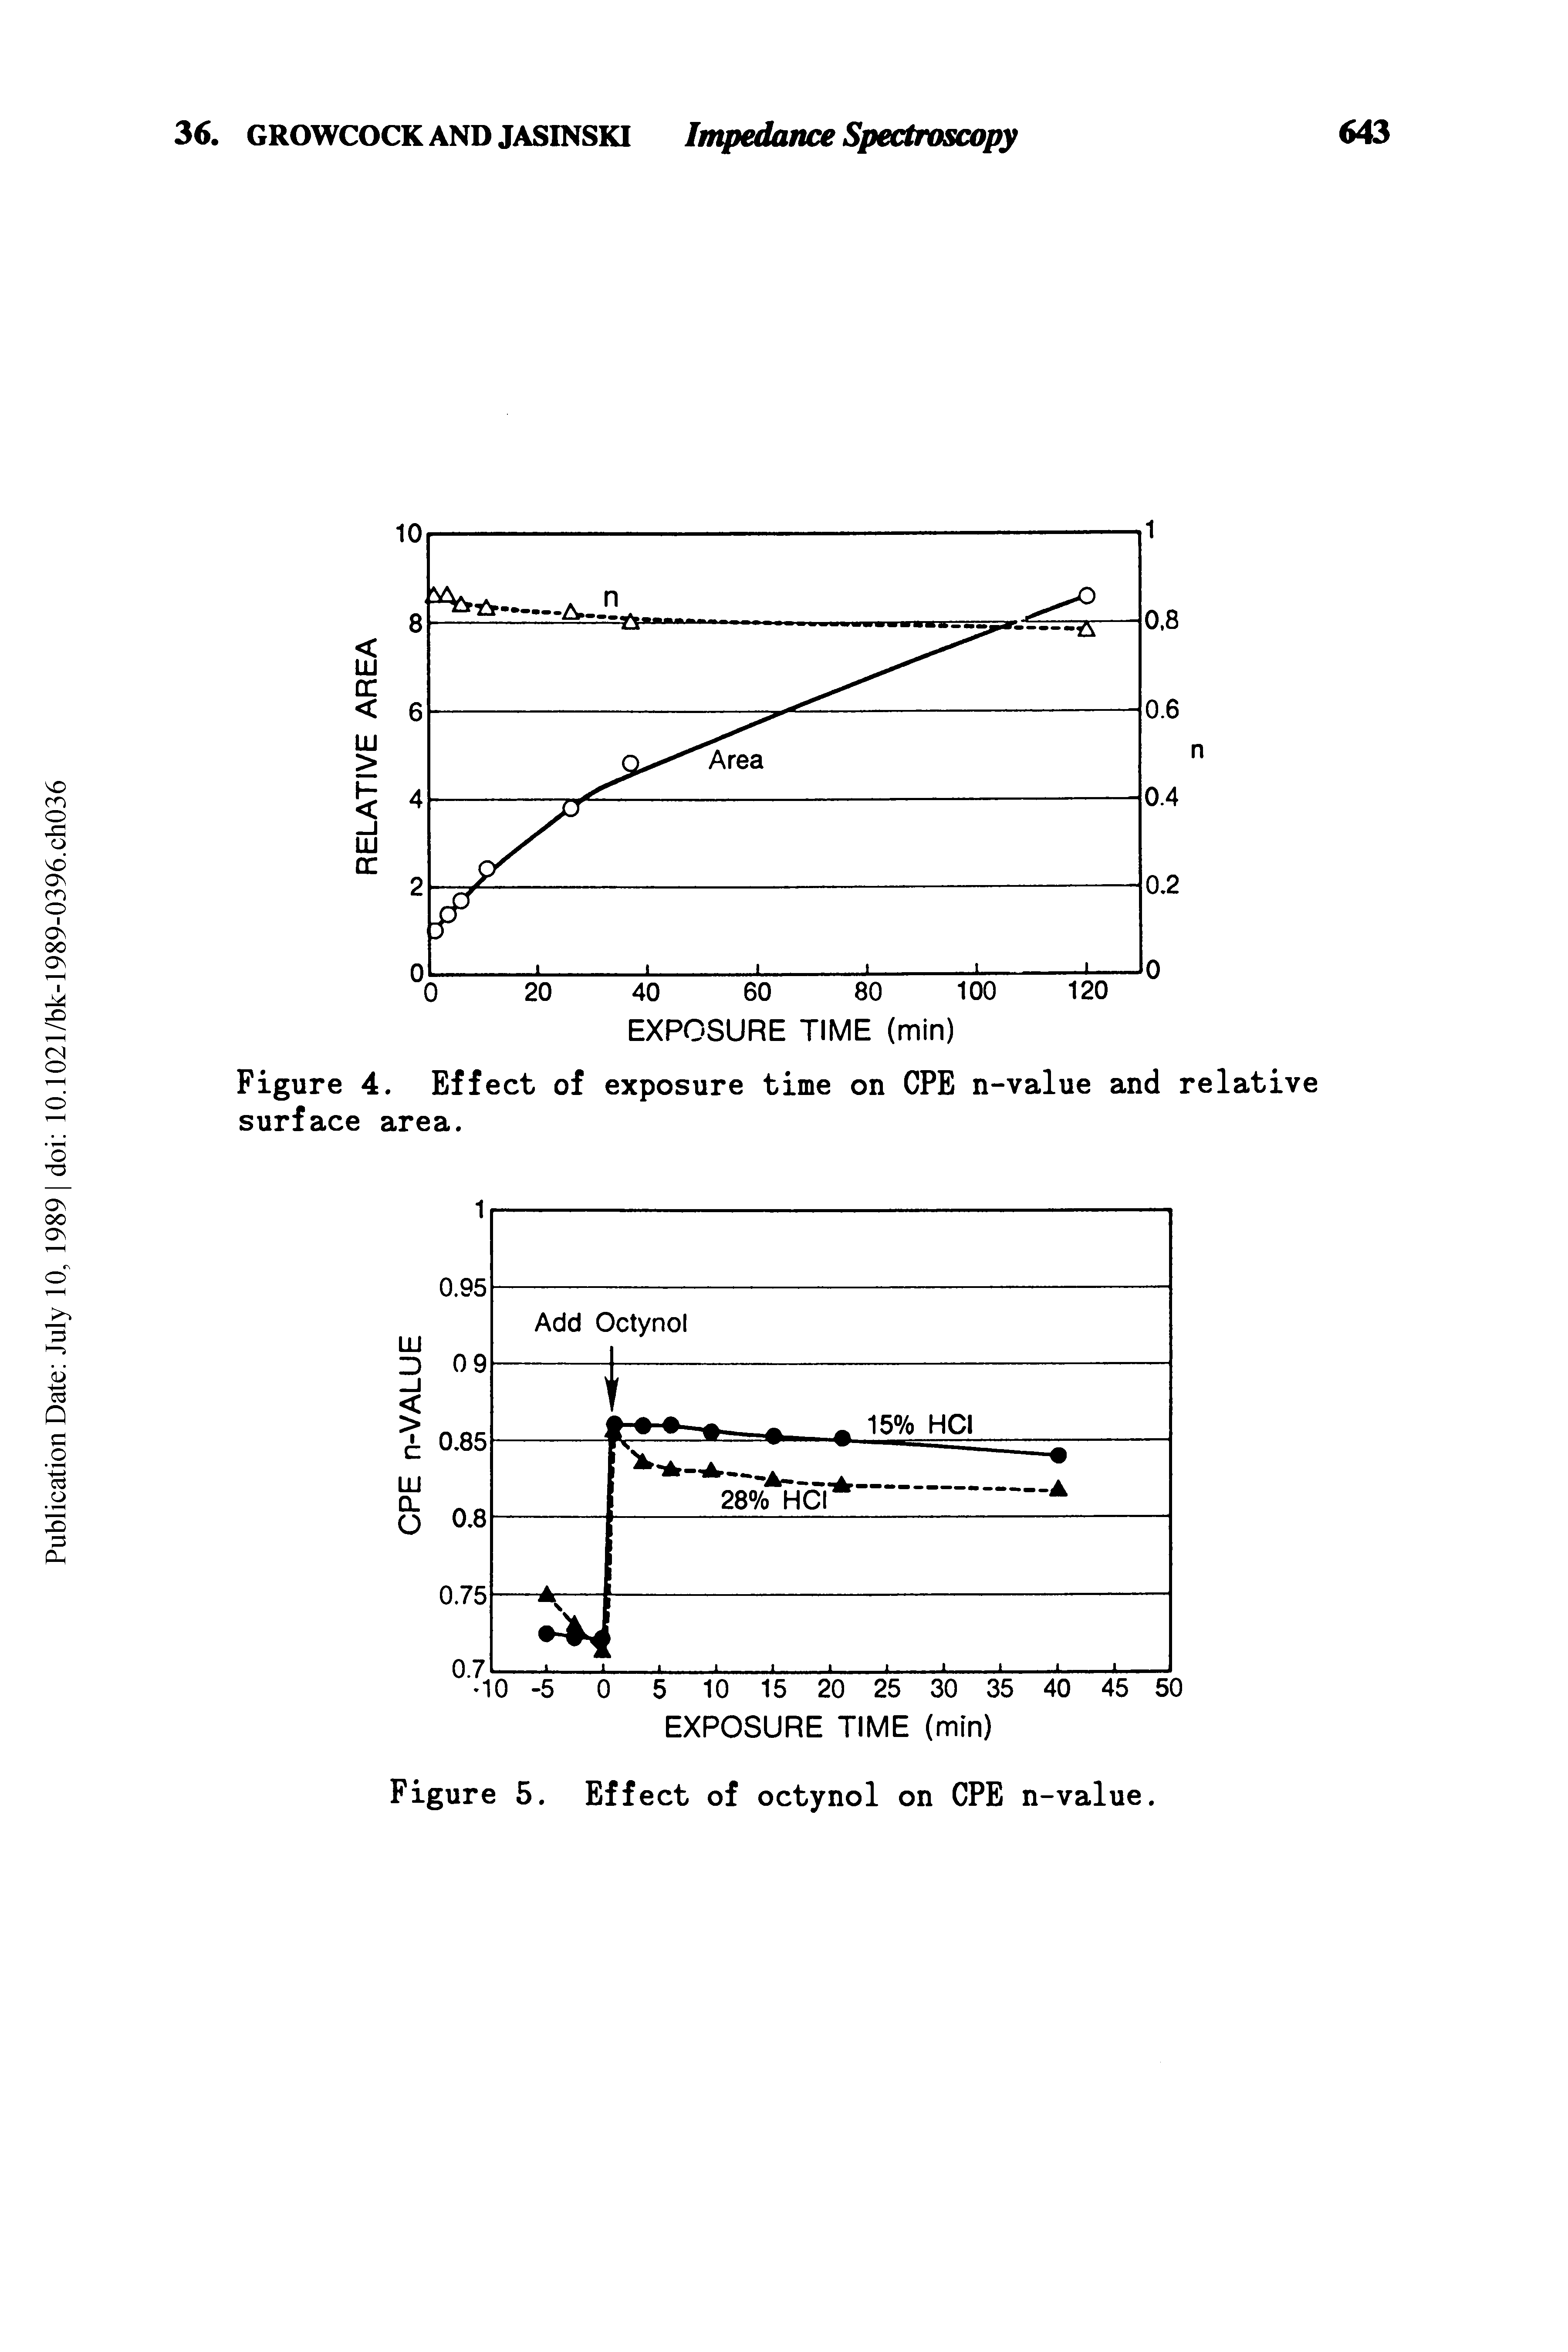 Figure 4. Effect of exposure time on CPE n-value and relative surface area.